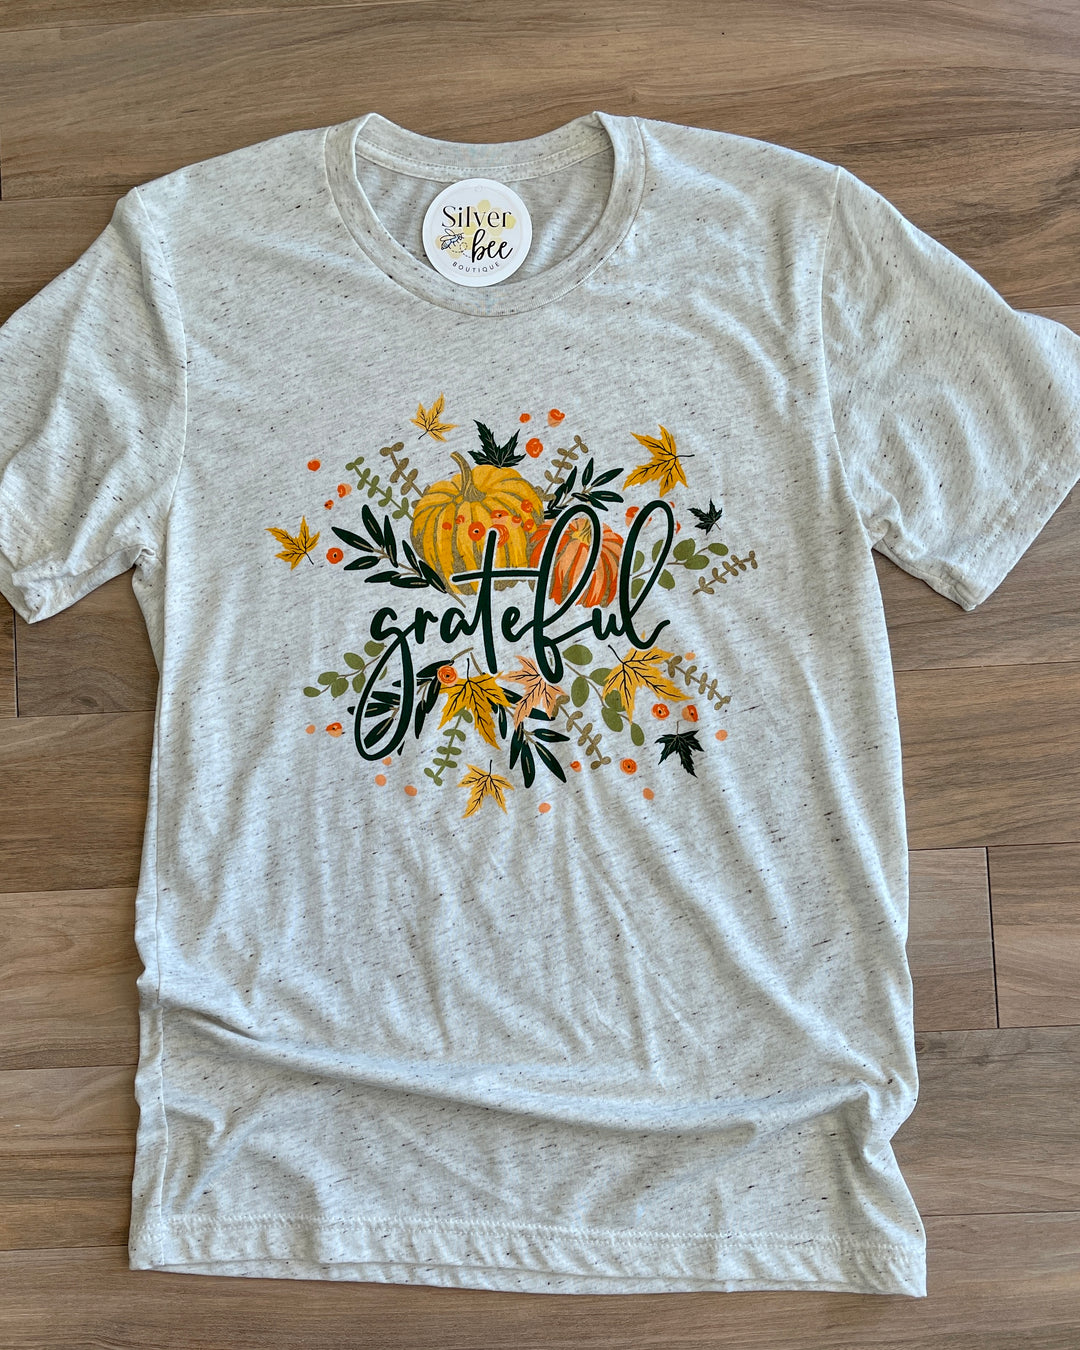 heathered cream colored tee, grateful text, fall leaves and pumpkins graphics